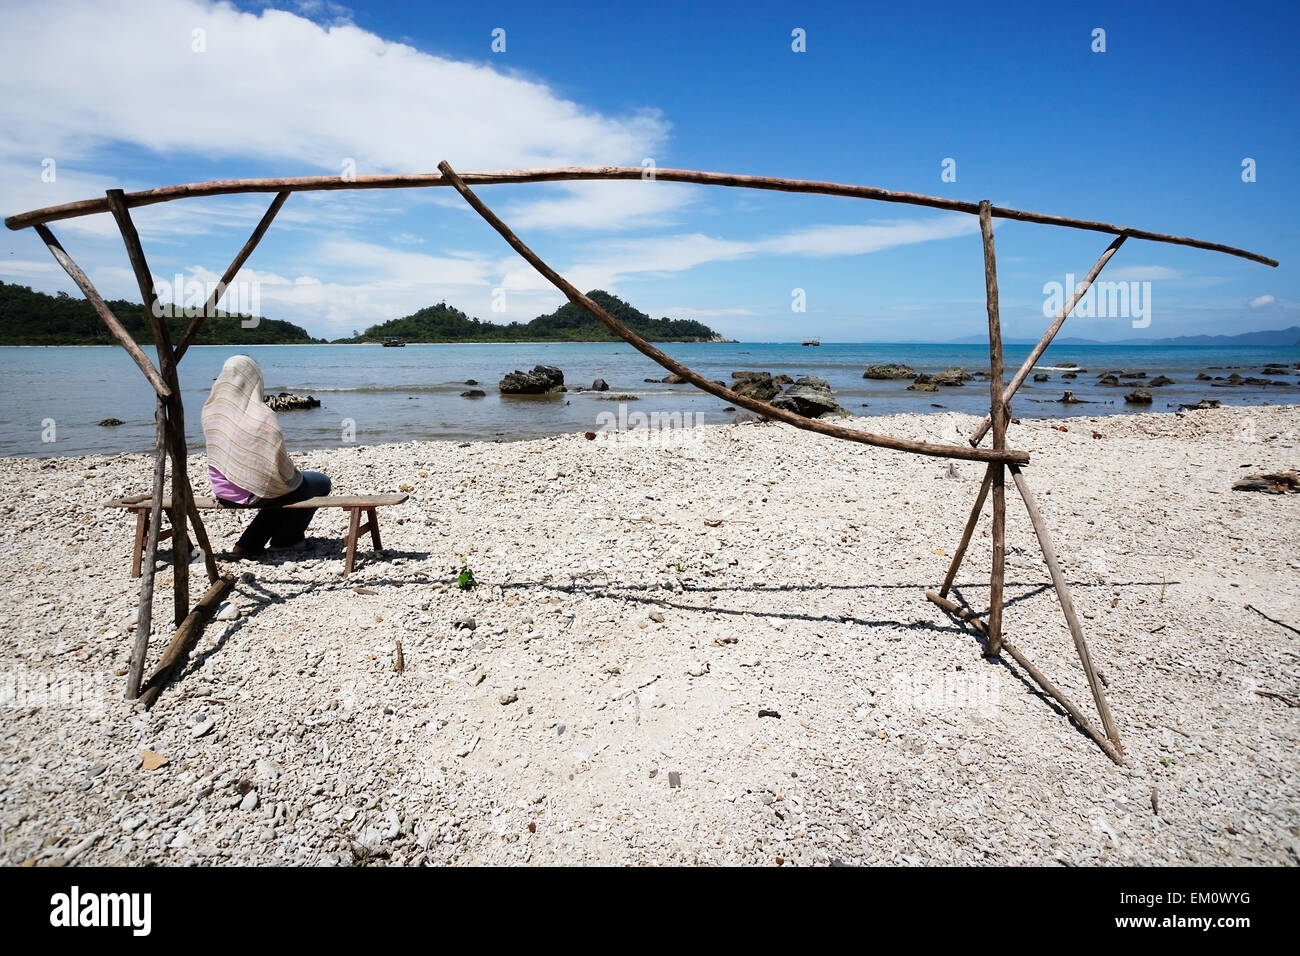 Beach,Sitting,Indonesia,Woman,Aceh Province Stock Photo